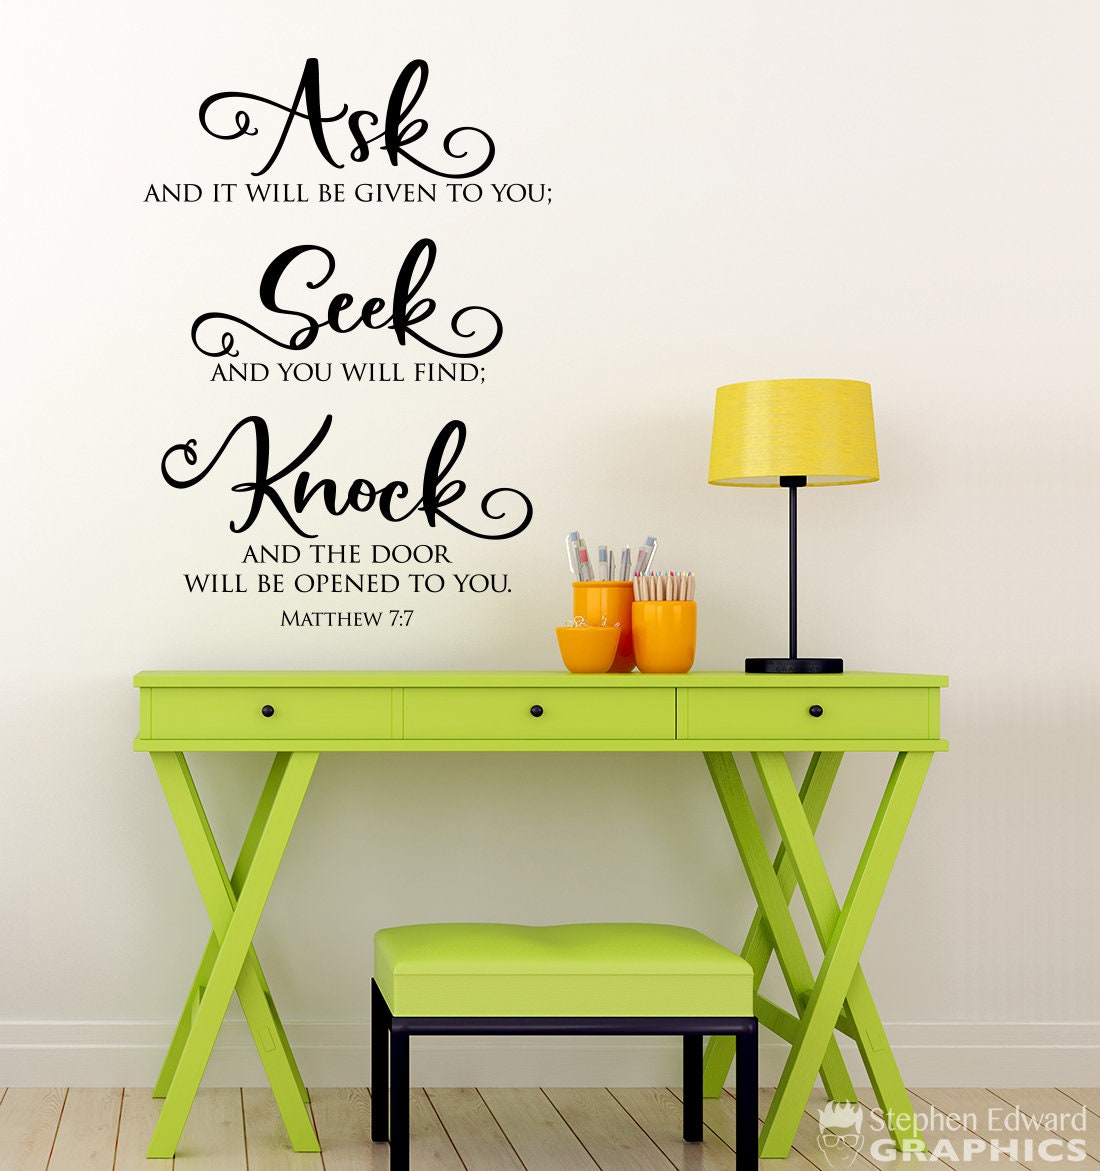 Ask and it will be given Seek and you will find Knock and the door will be opened Decal | Christian Decor | Matthew 7:7 Bible Verse Vinyl